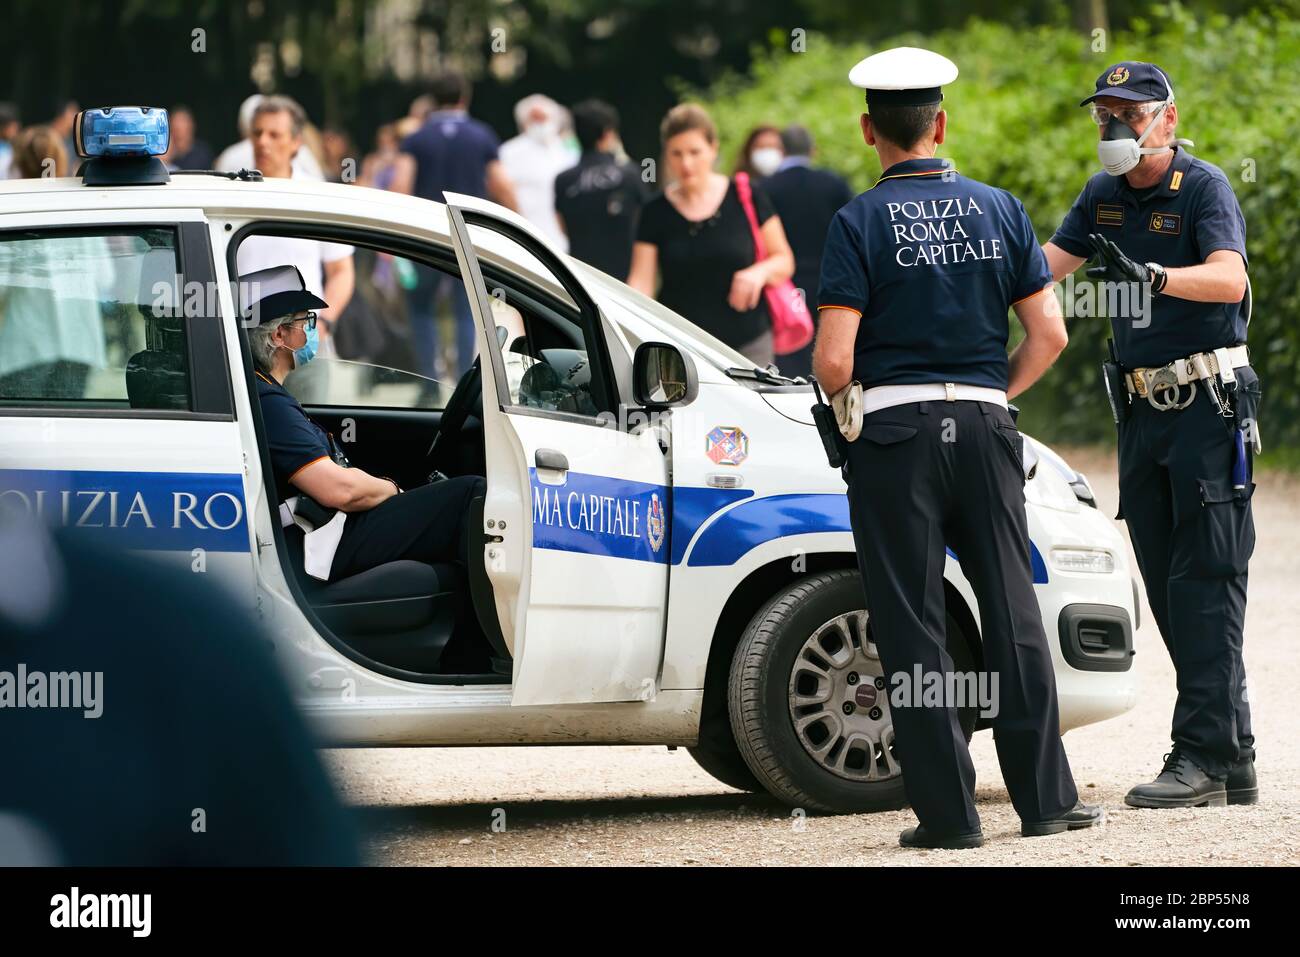 Italian Policemen Wearing Face Masks Watch People Gathering in Rome's Villa Ada City Park, as Social Distancing Measures Are Partially Lifted Stock Photo